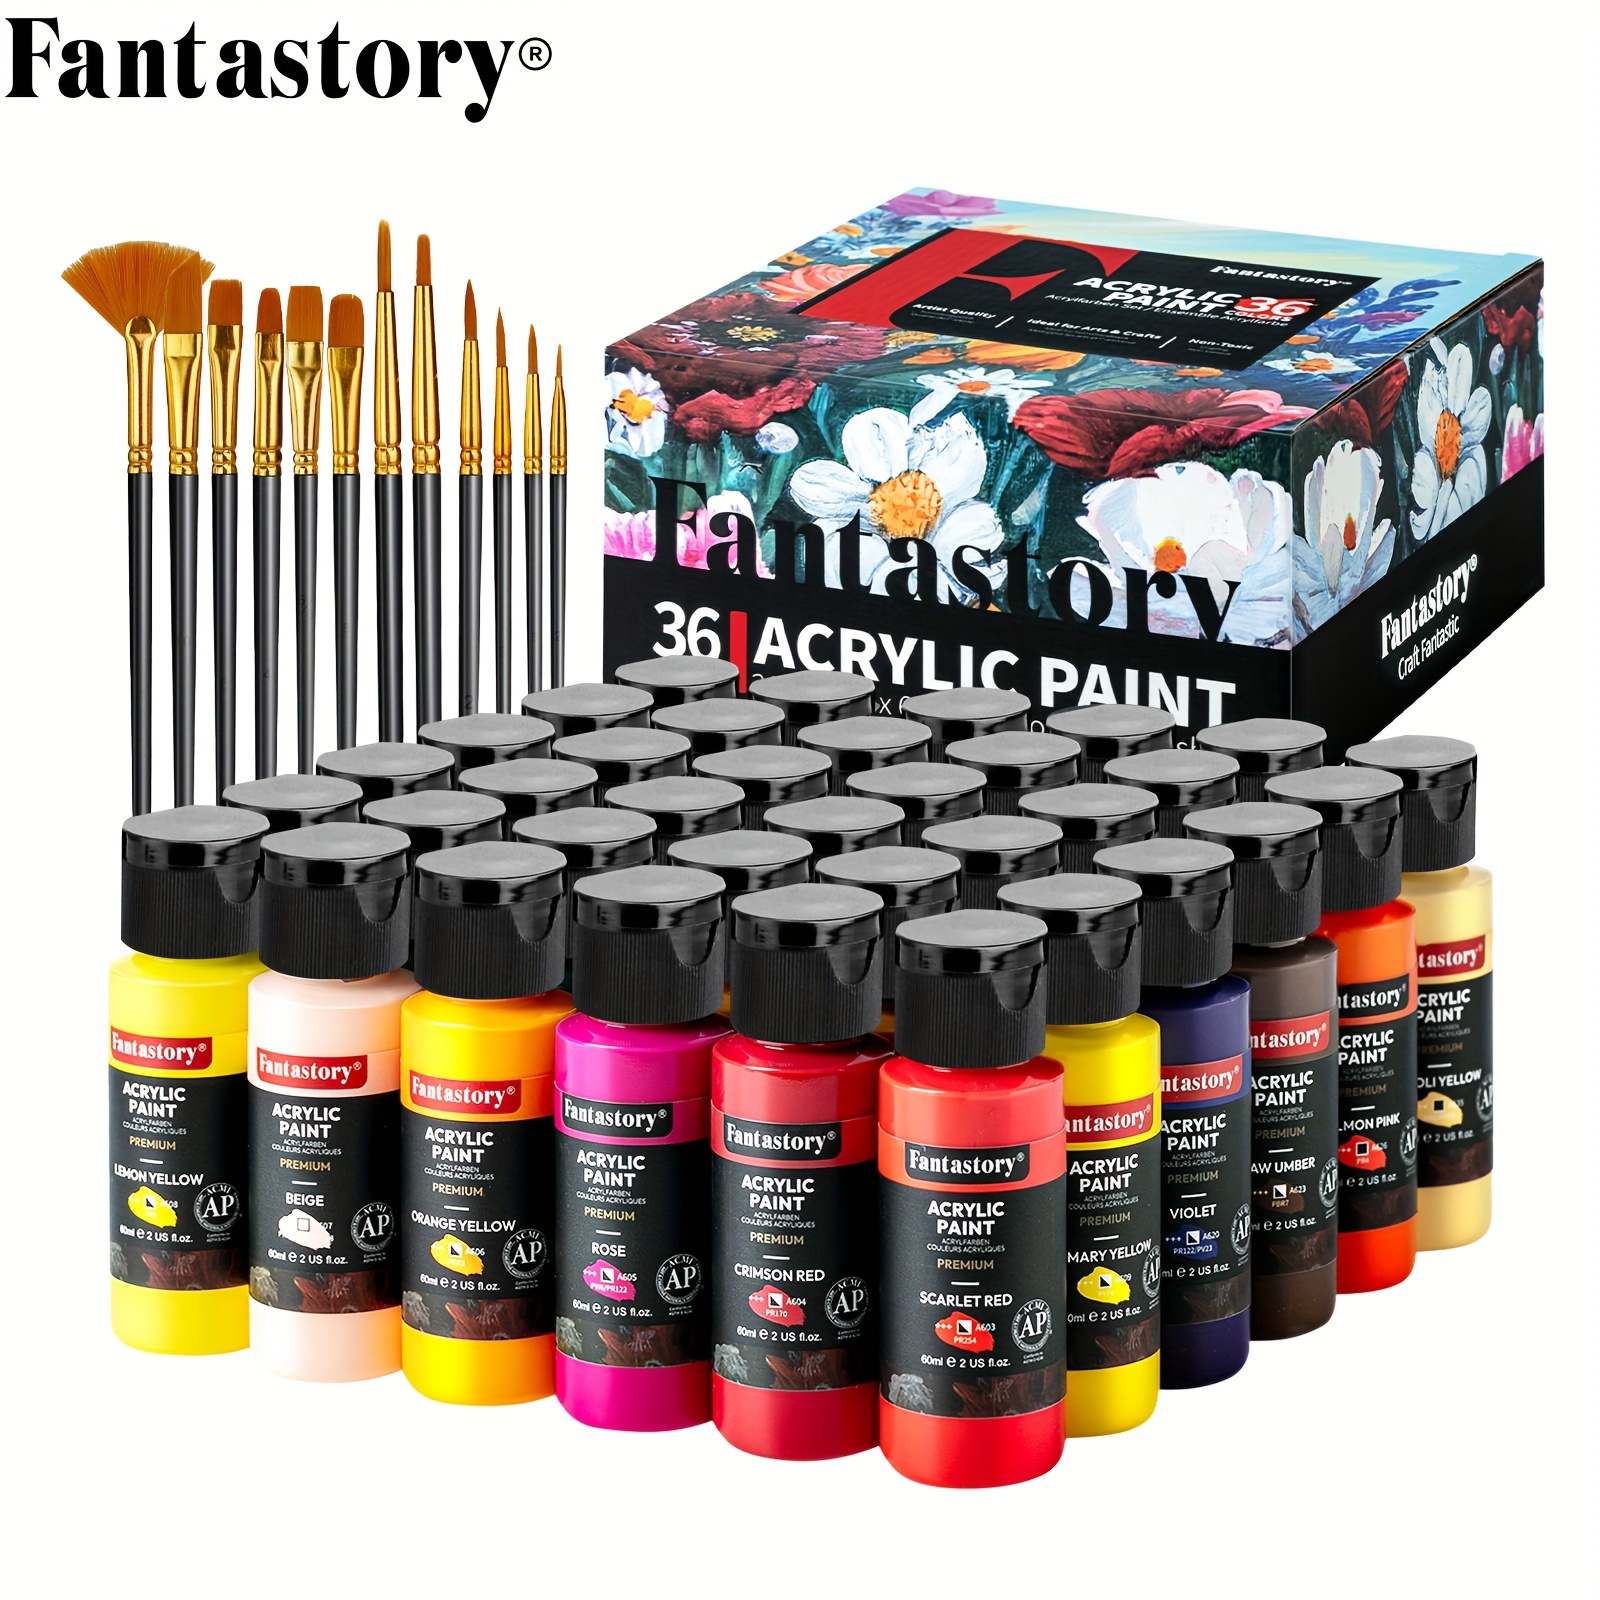 

Fantastory Acrylic Paint Set 36 Colors (2oz/60ml) With 12 Brushes, Professional Craft Thick Paints Kits For Adults, Canvas Wood Fabric Ceramic Rock Painting Supplies